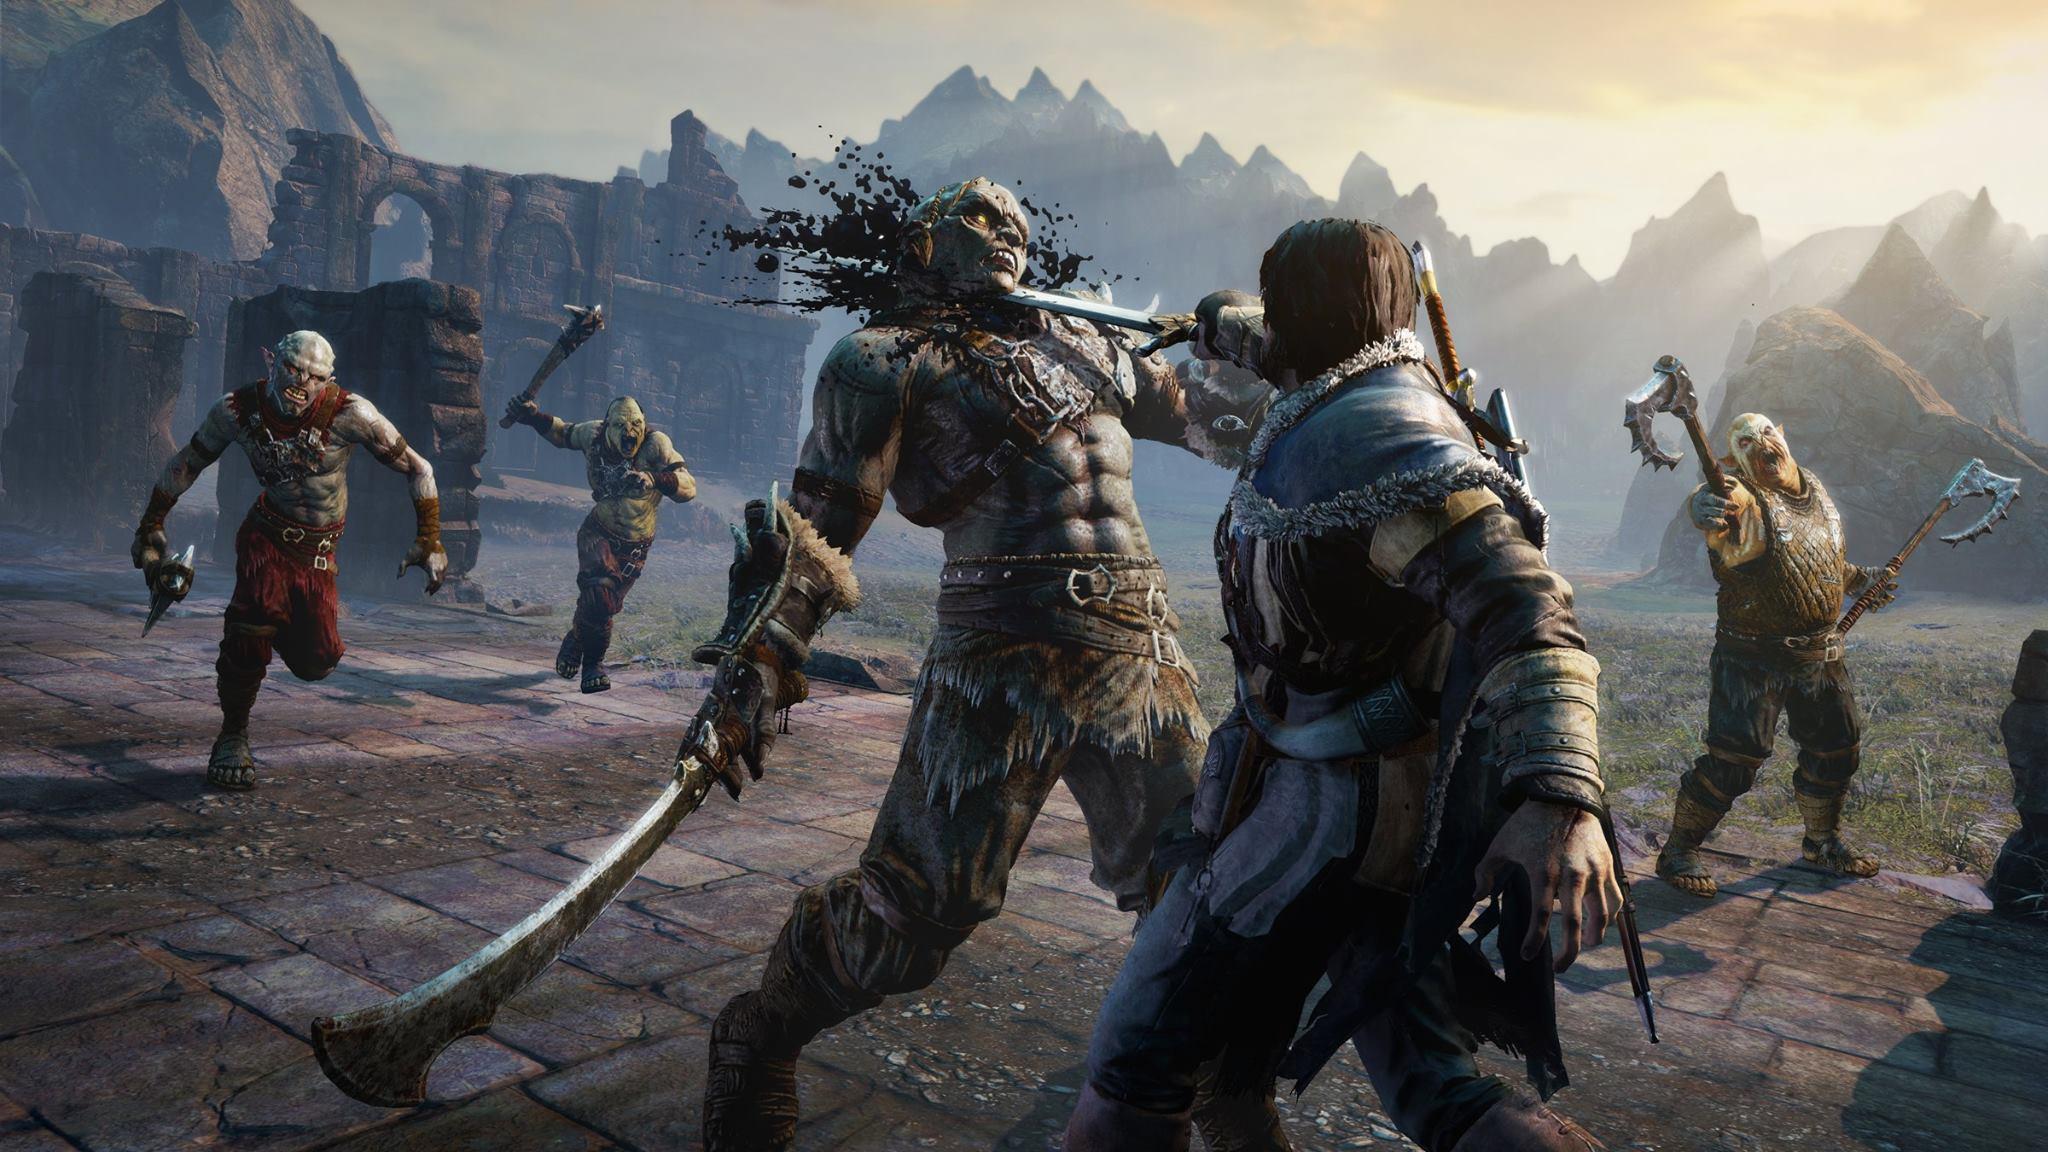 Middle Earth: Shadow Of Mordor HD Wallpaper. Background